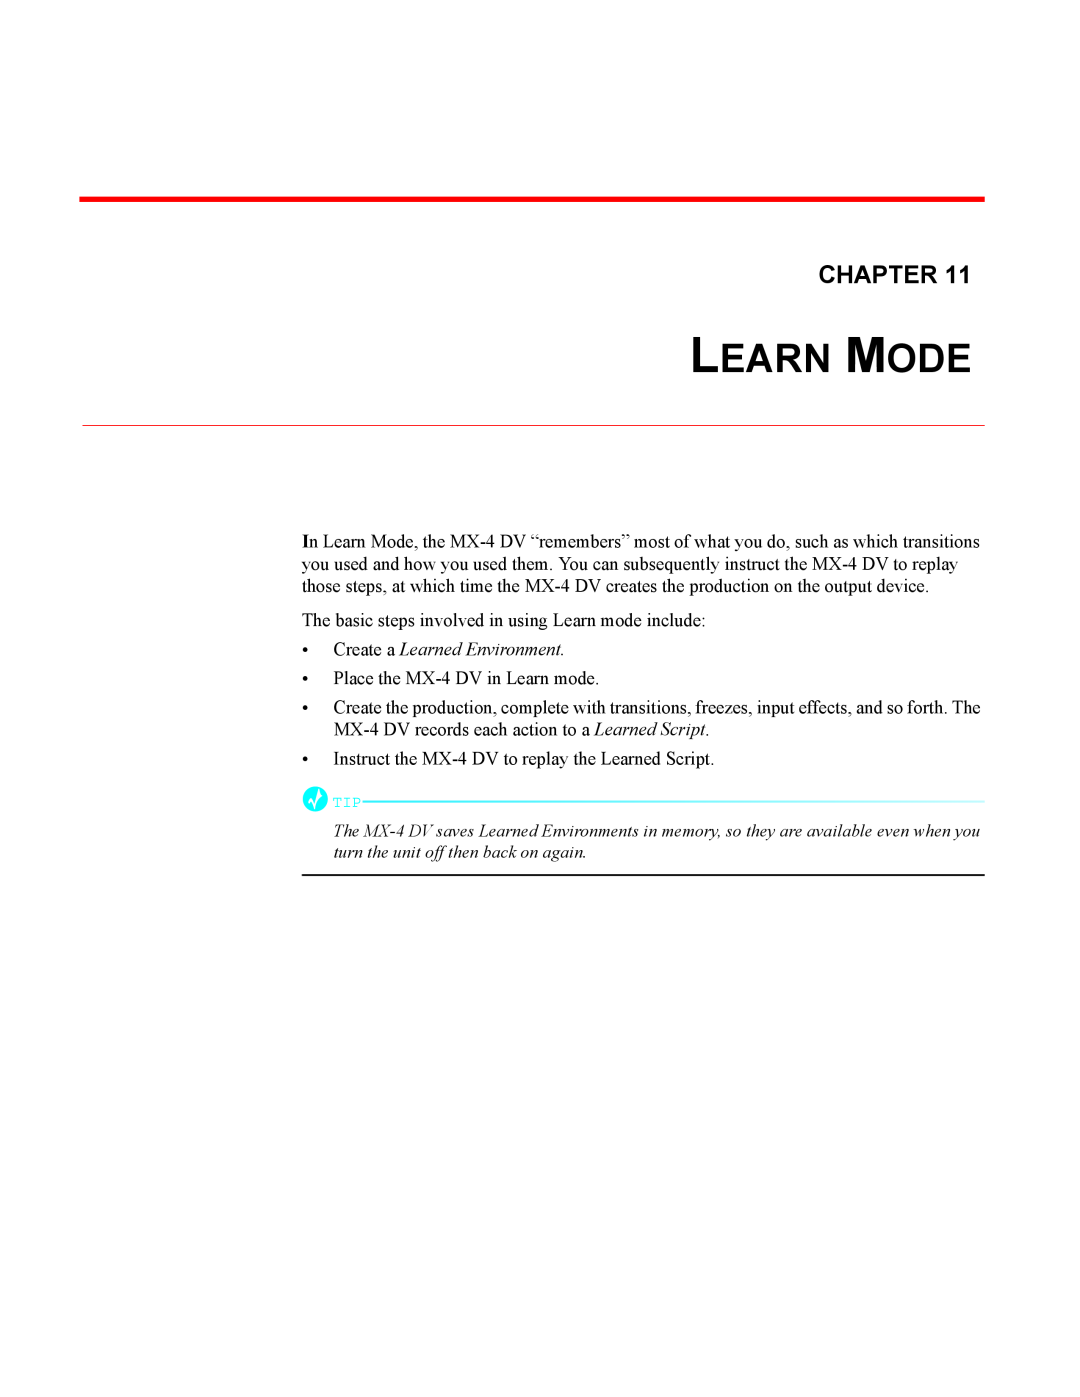 FOCUS Enhancements MX-4DV manual Learn Mode, Create a Learned Environment, Chapter 